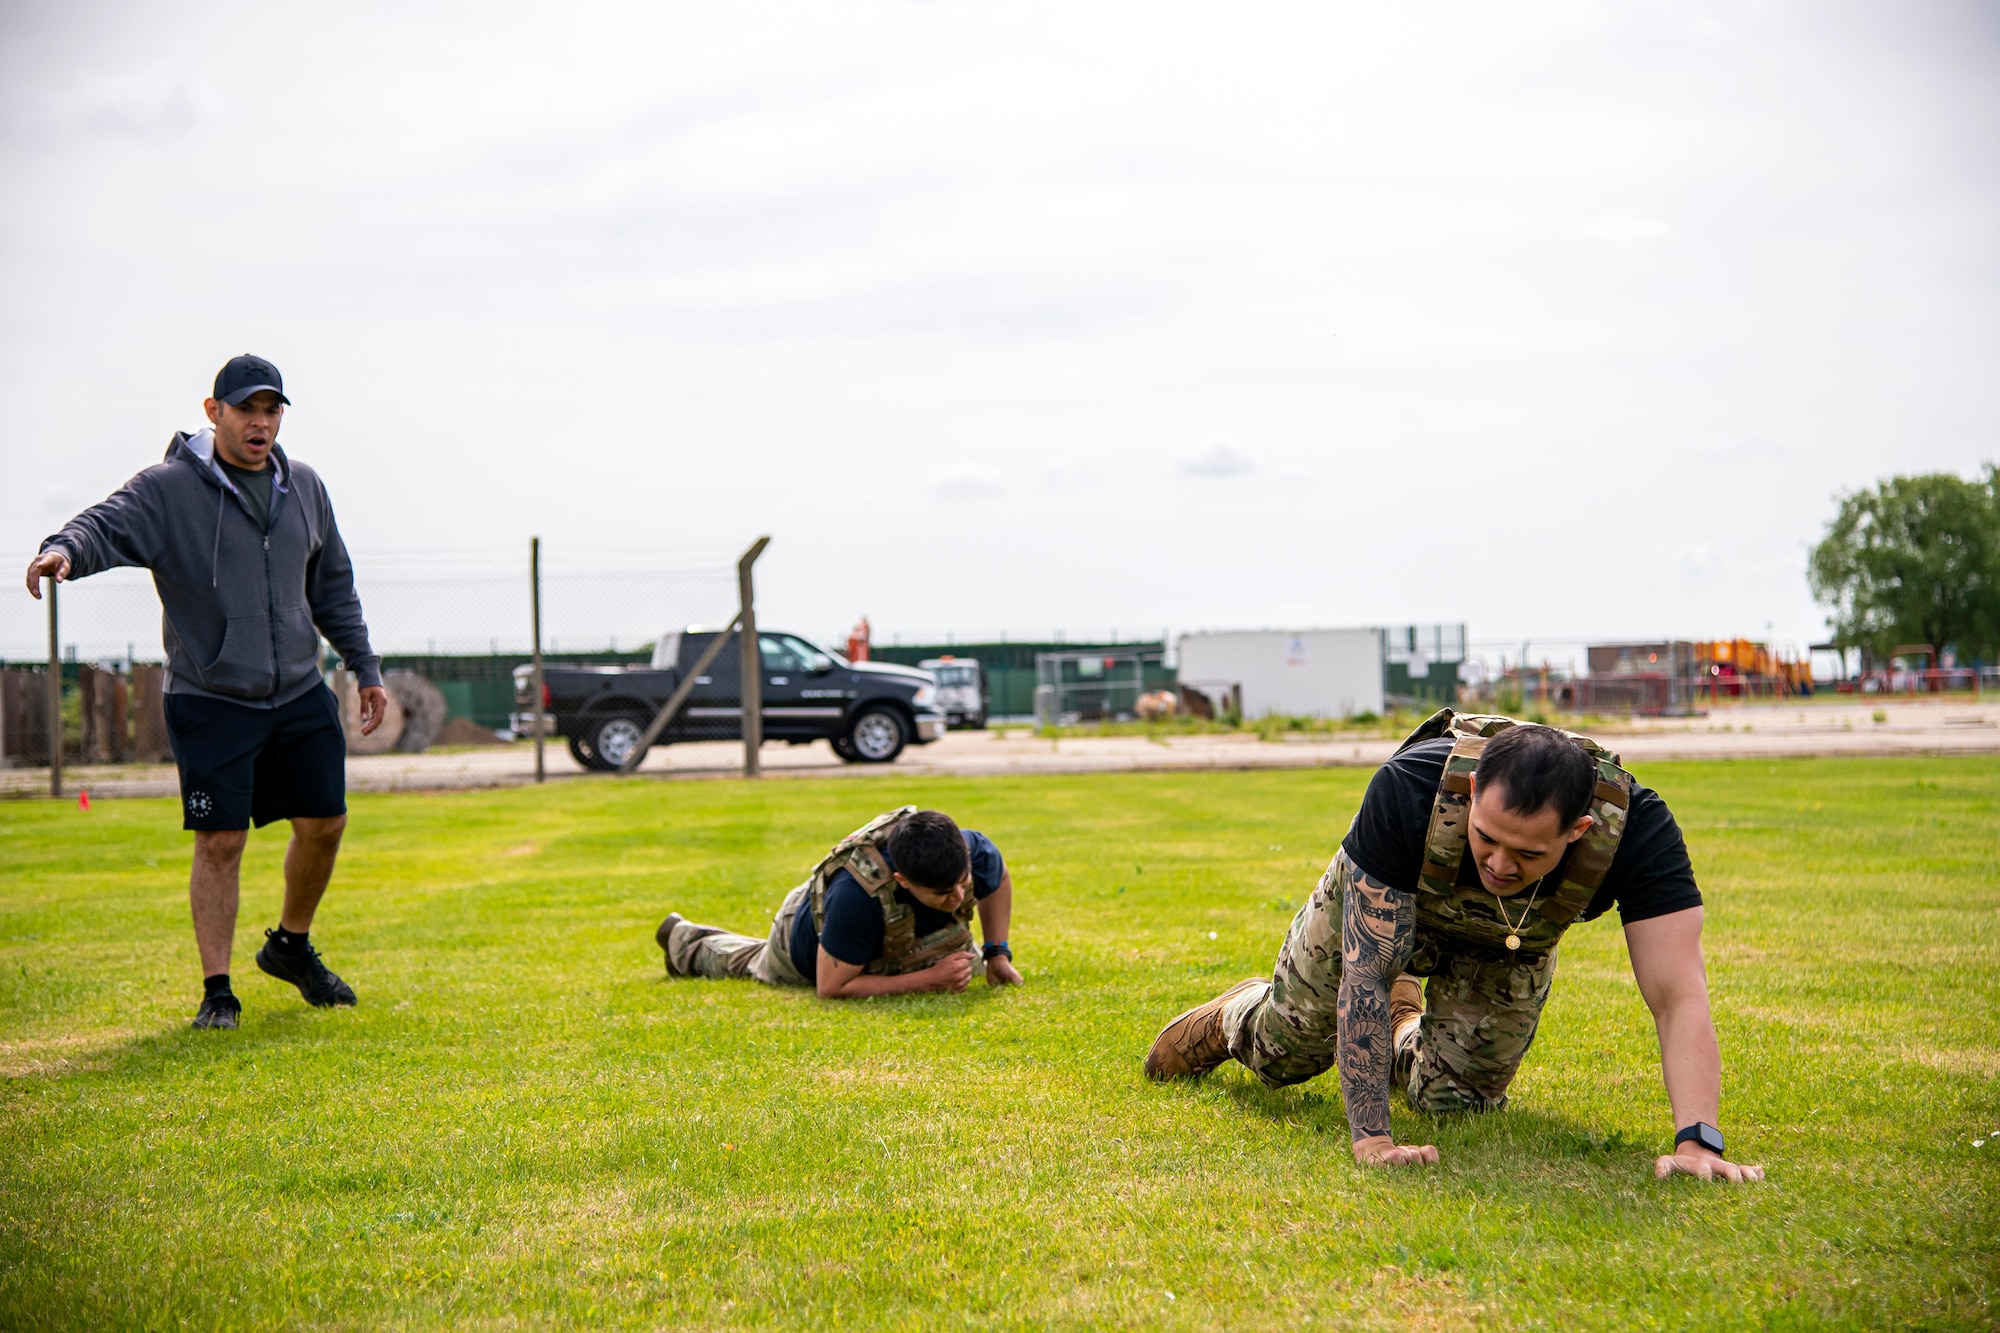 U.S. Air Force Staff Sgt. Noel Rillona, right, 423d Security Forces Squadron flight trainer, and Senior Airman Adrien Tovar, center, 423d SFS trainer, low crawl as part of a defender challenge at RAF Alconbury, May 18, 2022. Airmen, civilians and local law enforcement participated in the challenge, held in honor of National Police Week, to pay homage to those who gave their lives in the line of duty. (U.S. Air Force photo by Staff Sgt. Eugene Oliver)